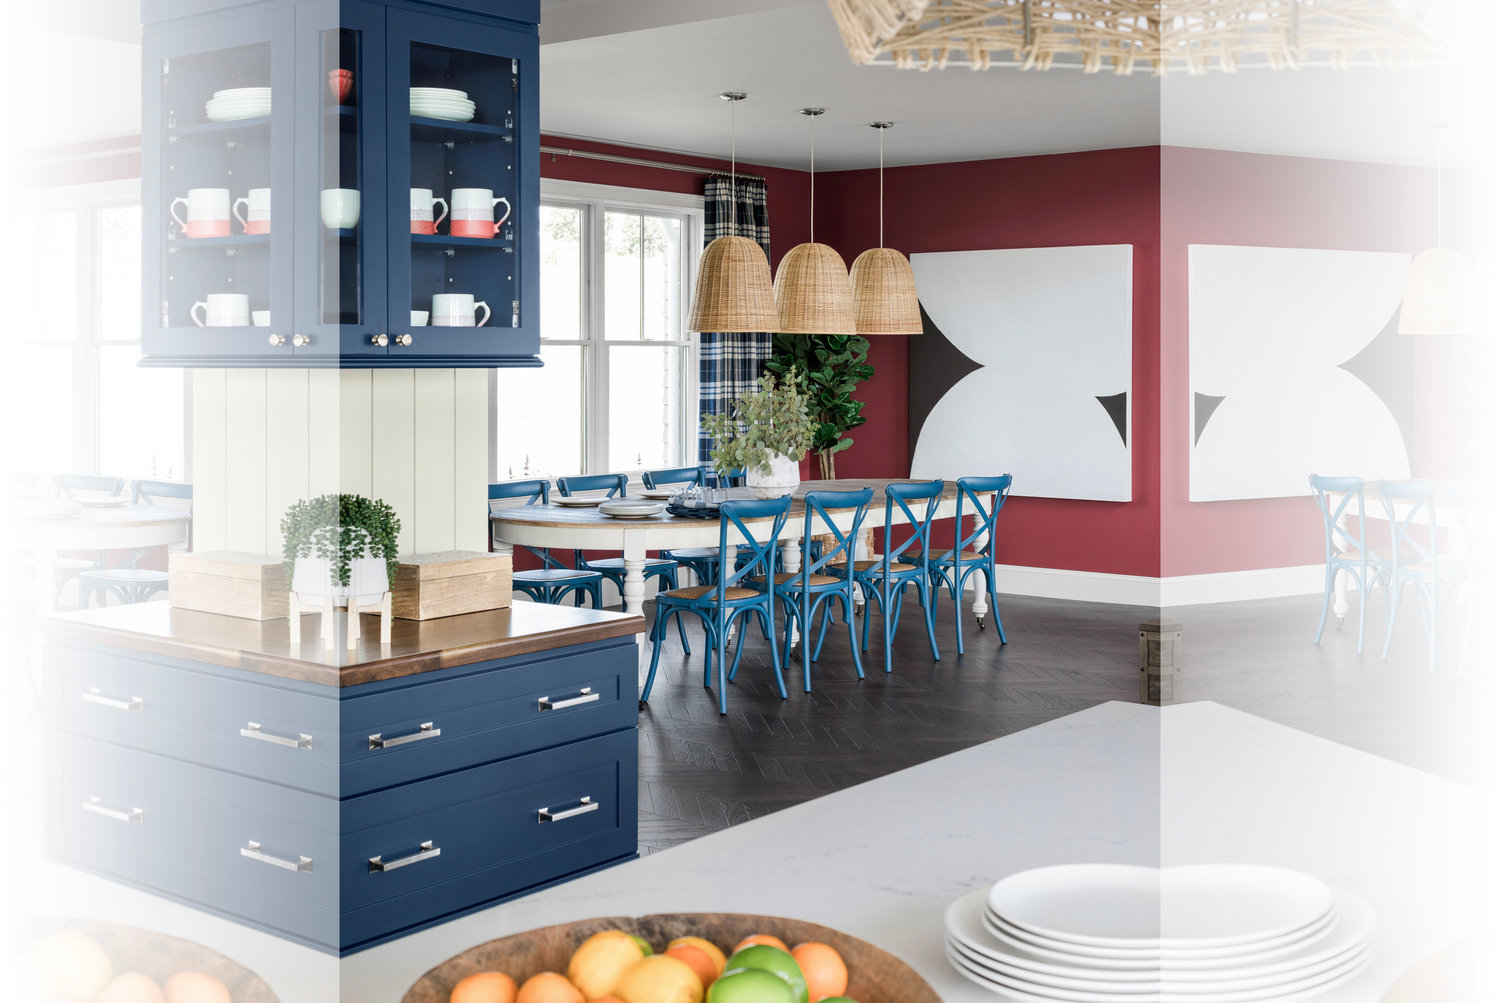 A consistent colorway of red and navy along with accents like pendant lighting in natural textures add a cohesive flow to the open floor plan